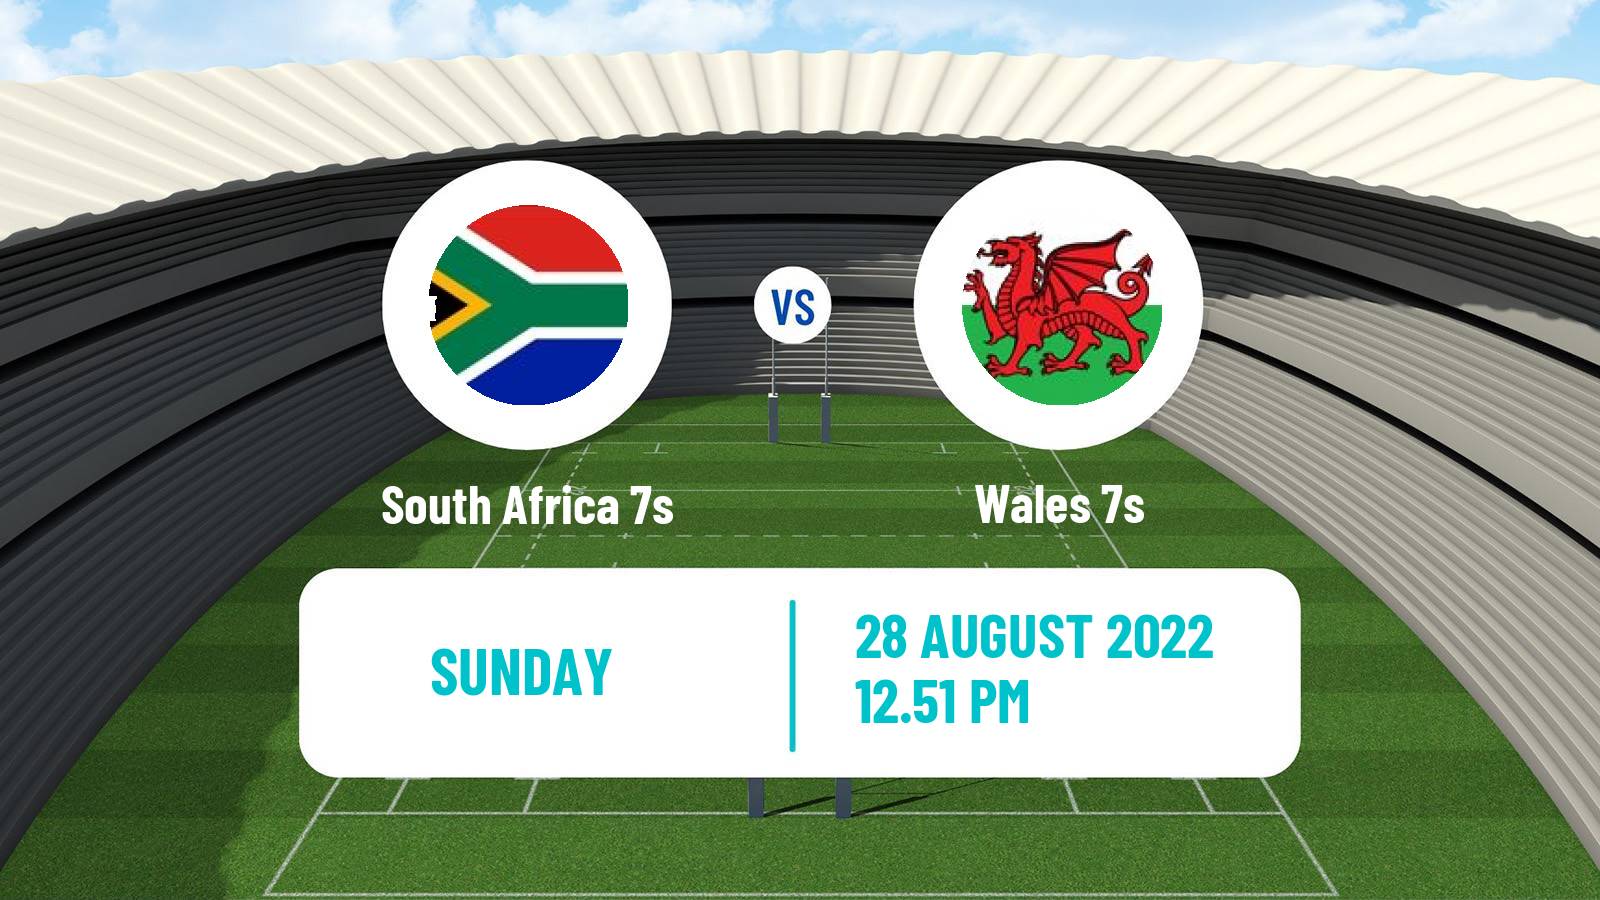 Rugby union Sevens World Series - USA South Africa 7s - Wales 7s